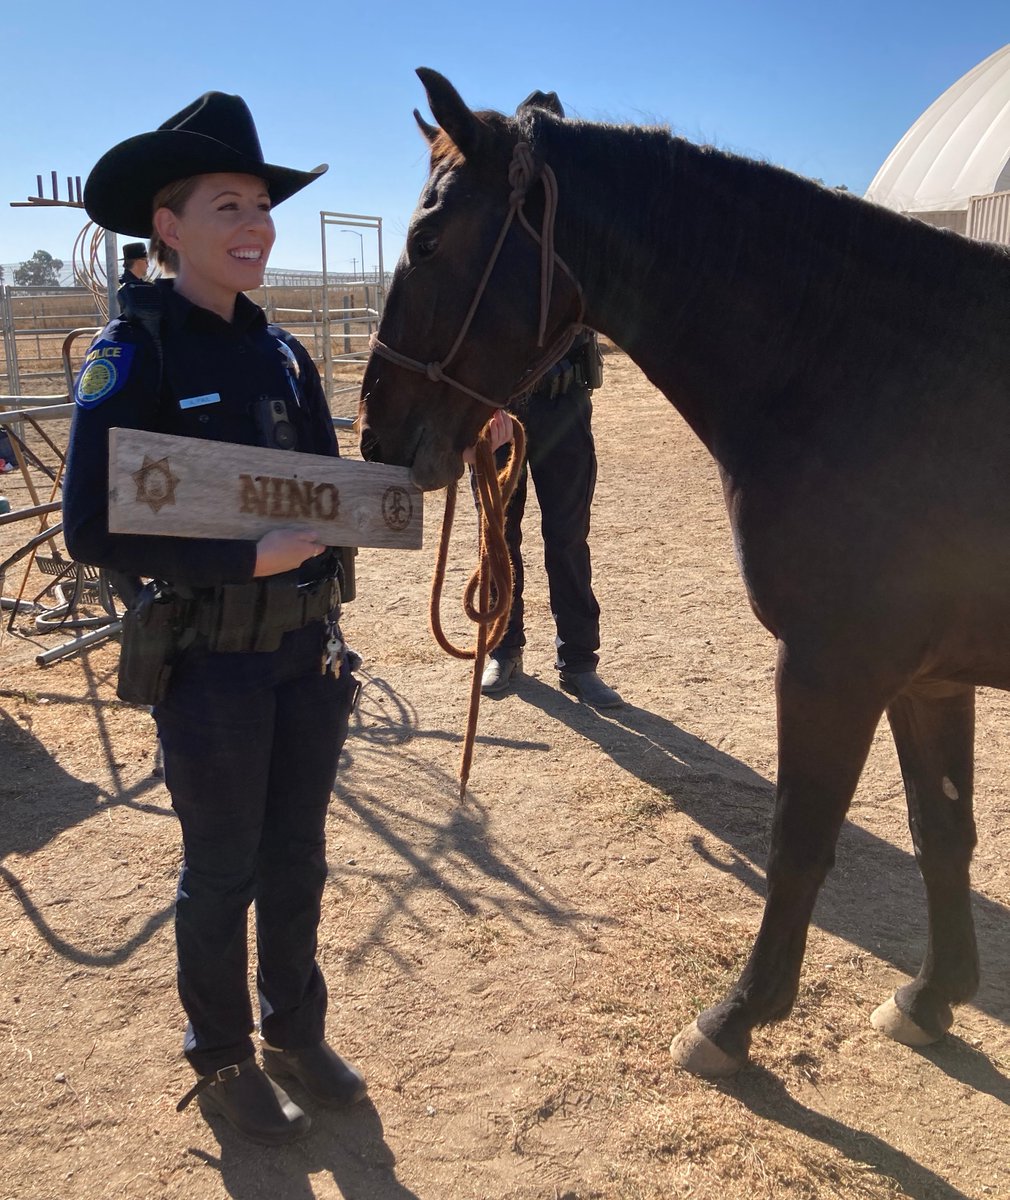 Mount up! 🐎Recently, @SacPolice adopted 2 geldings from our R3C program, Niño & Buddy, to add to their mounted unit. 🎉Congrats and many thanks for your continued support of our Wild Horse and Burro program! To learn more about this program: ow.ly/QS1B50Q0hvP @blmwhb